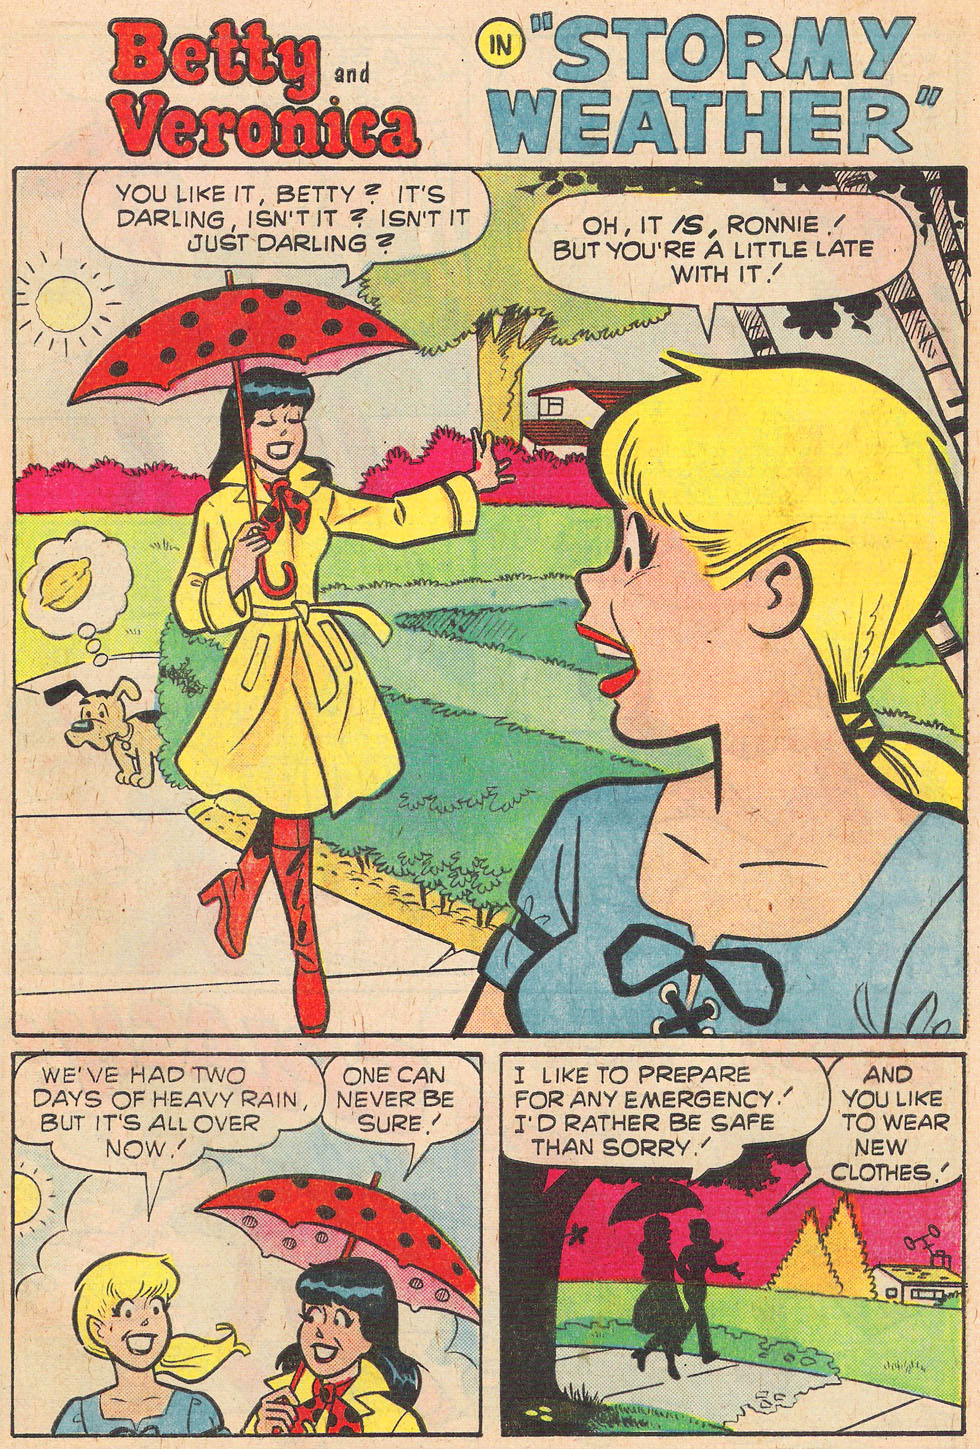 Read online Archie's Girls Betty and Veronica comic -  Issue #252 - 29